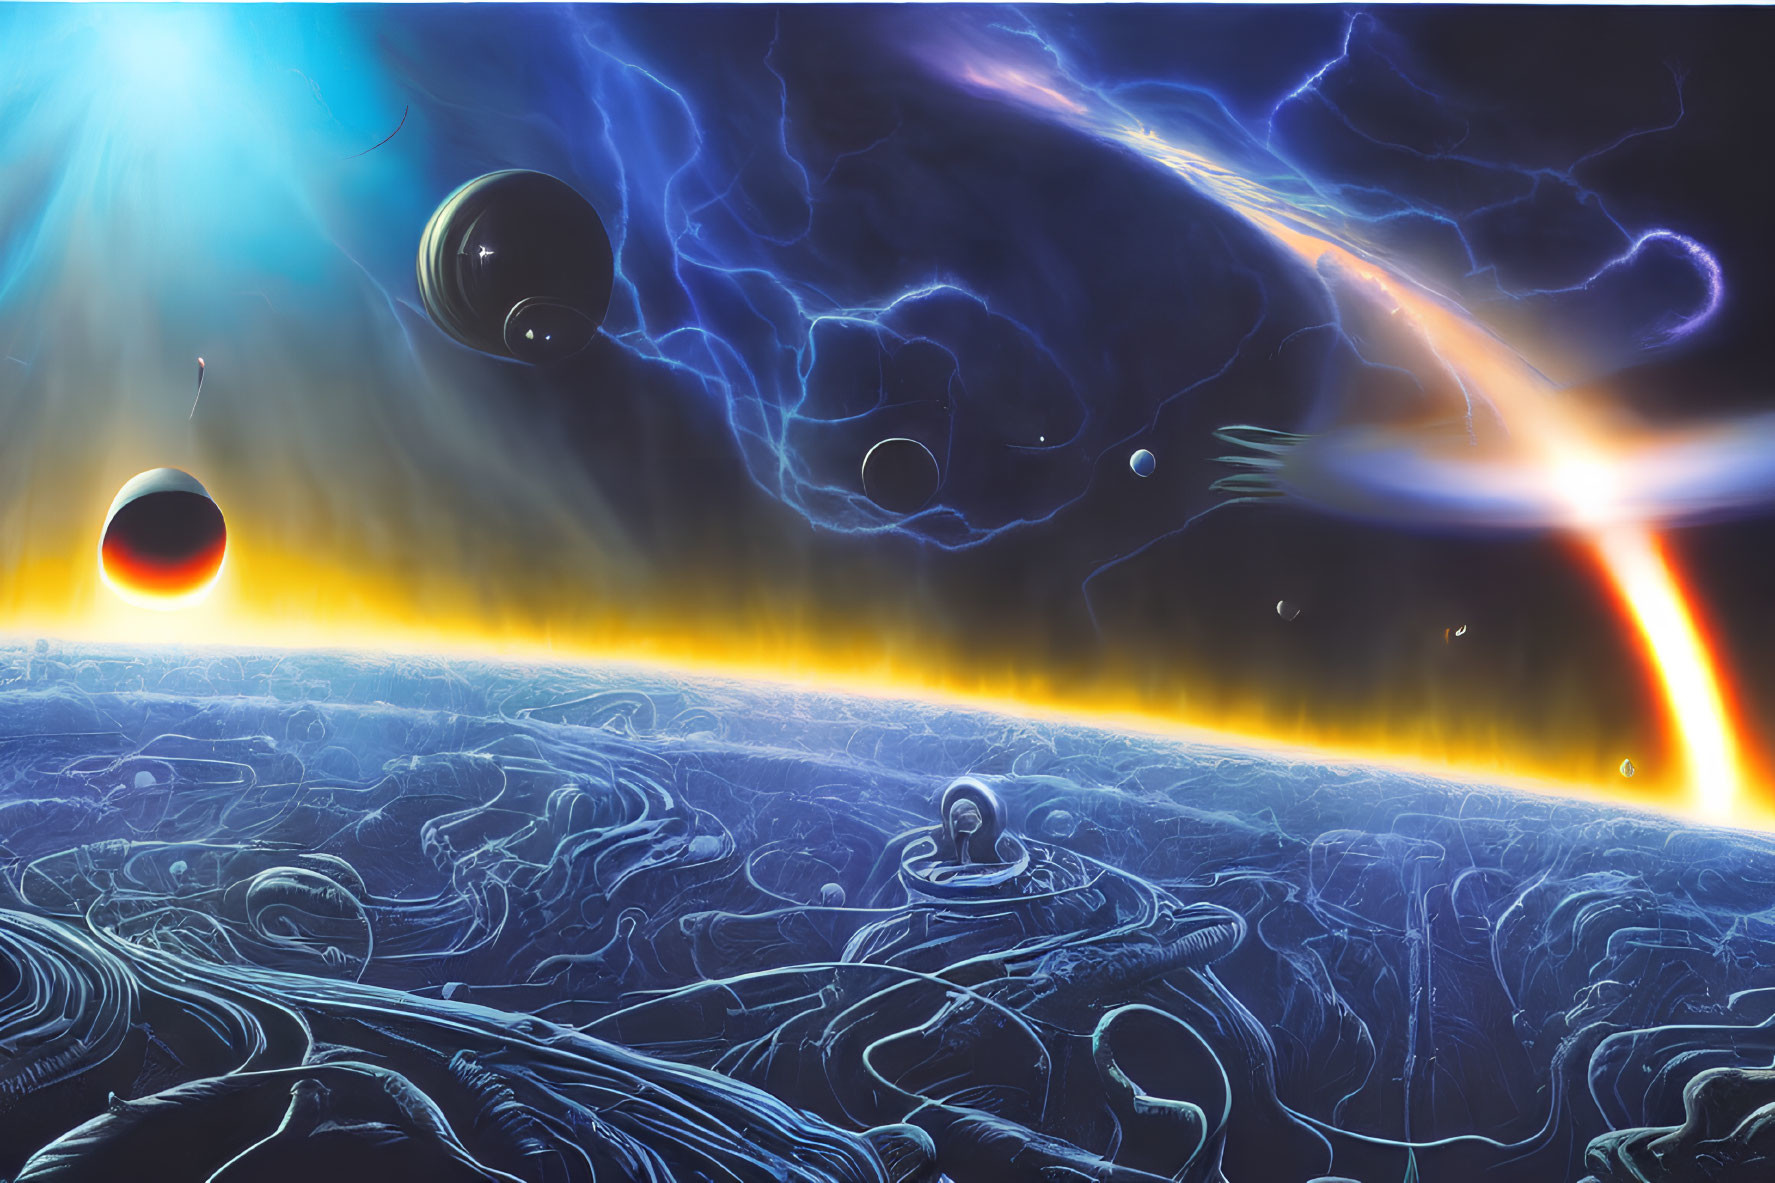 Surreal outer space landscape with planets, glowing horizon, and cosmic energy swirls